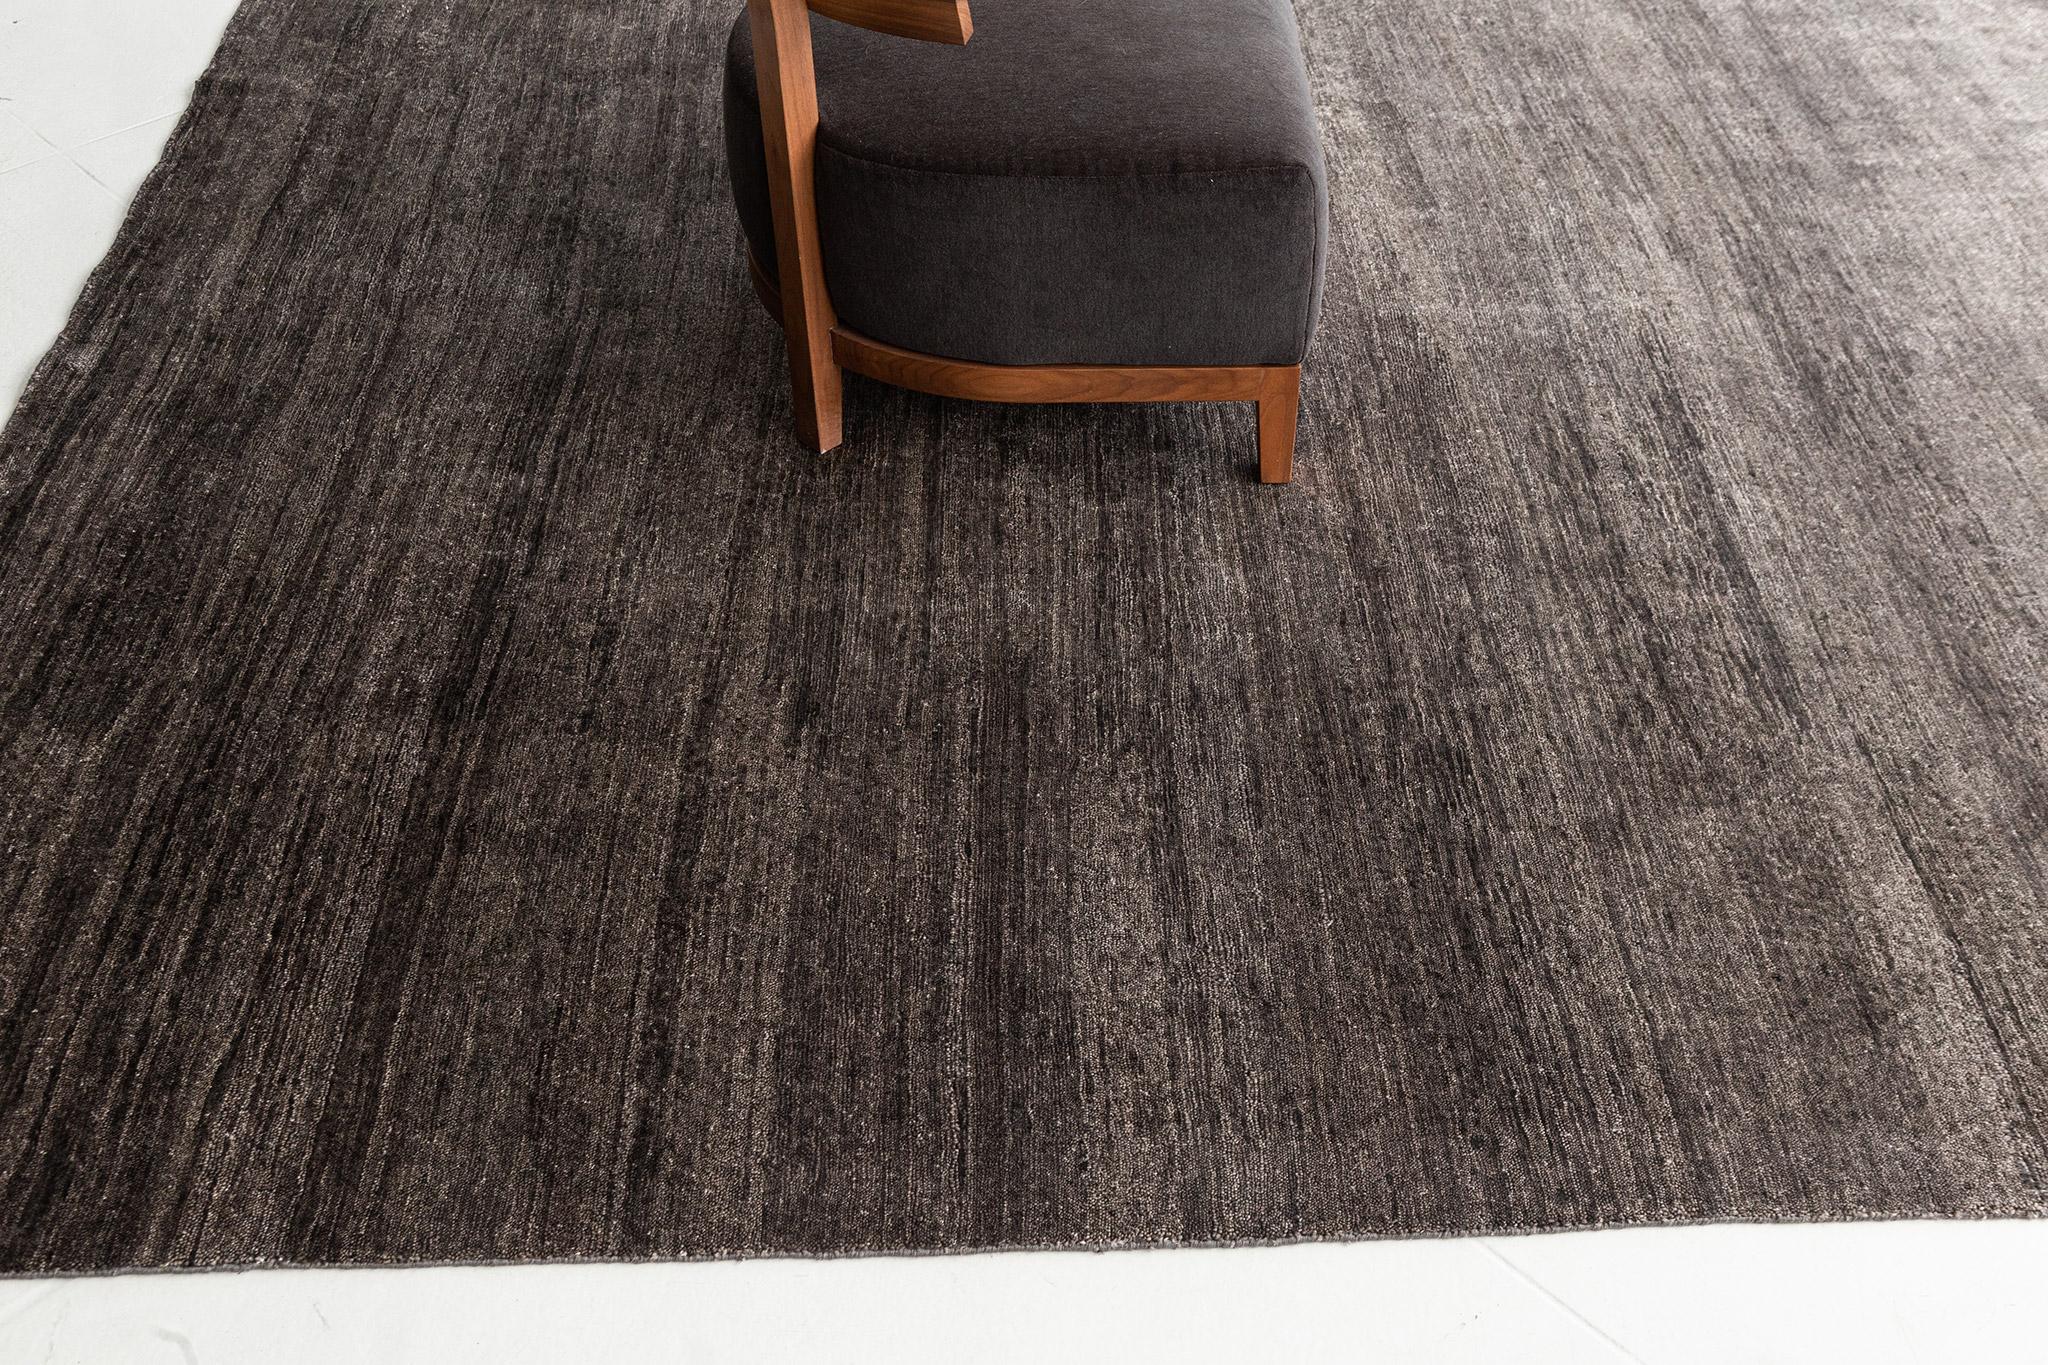 Dara' is a solid bamboo silk rug in stunning charcoal tones. Its simplicity does not take away from the rug's luxurious quality and beautiful sheen. Dara is a splendid rug for any design space.

Rug Number
25938
Size
7' 11